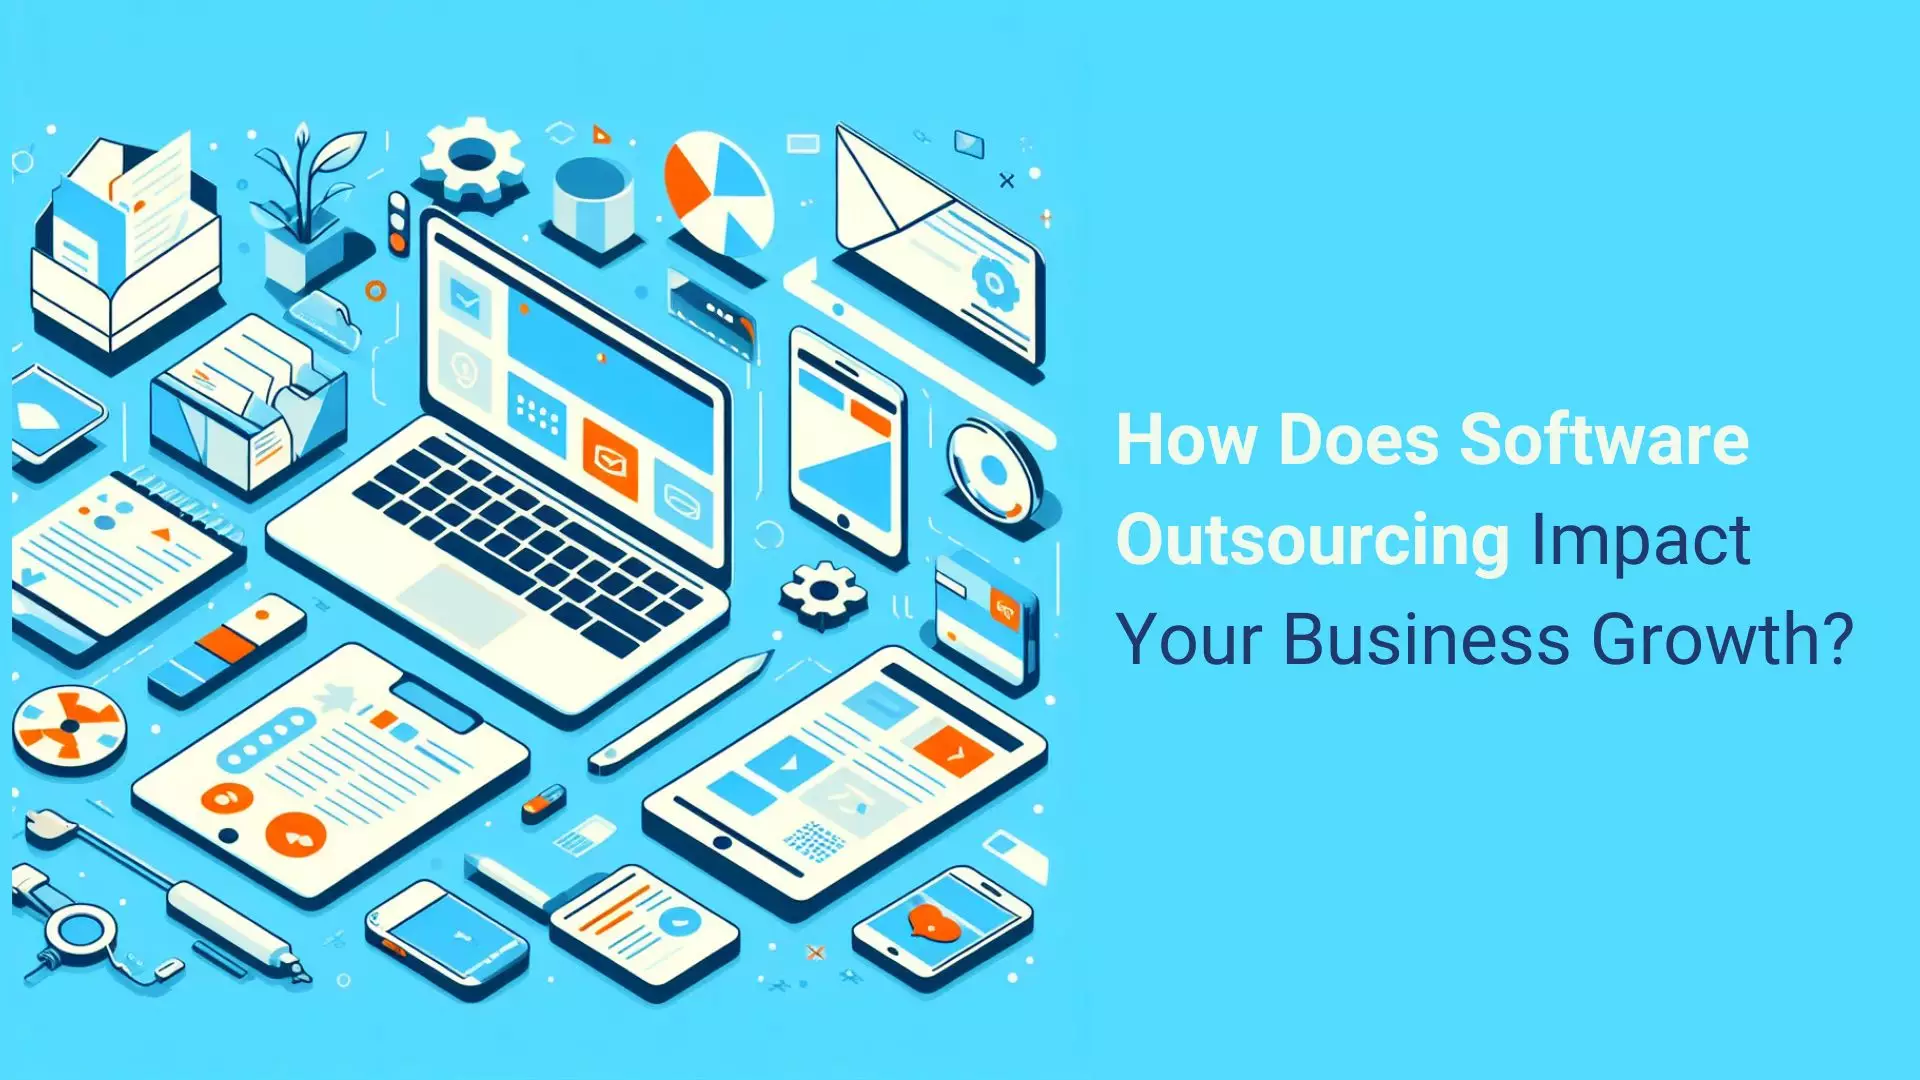  how does software outsourcing impact business growth